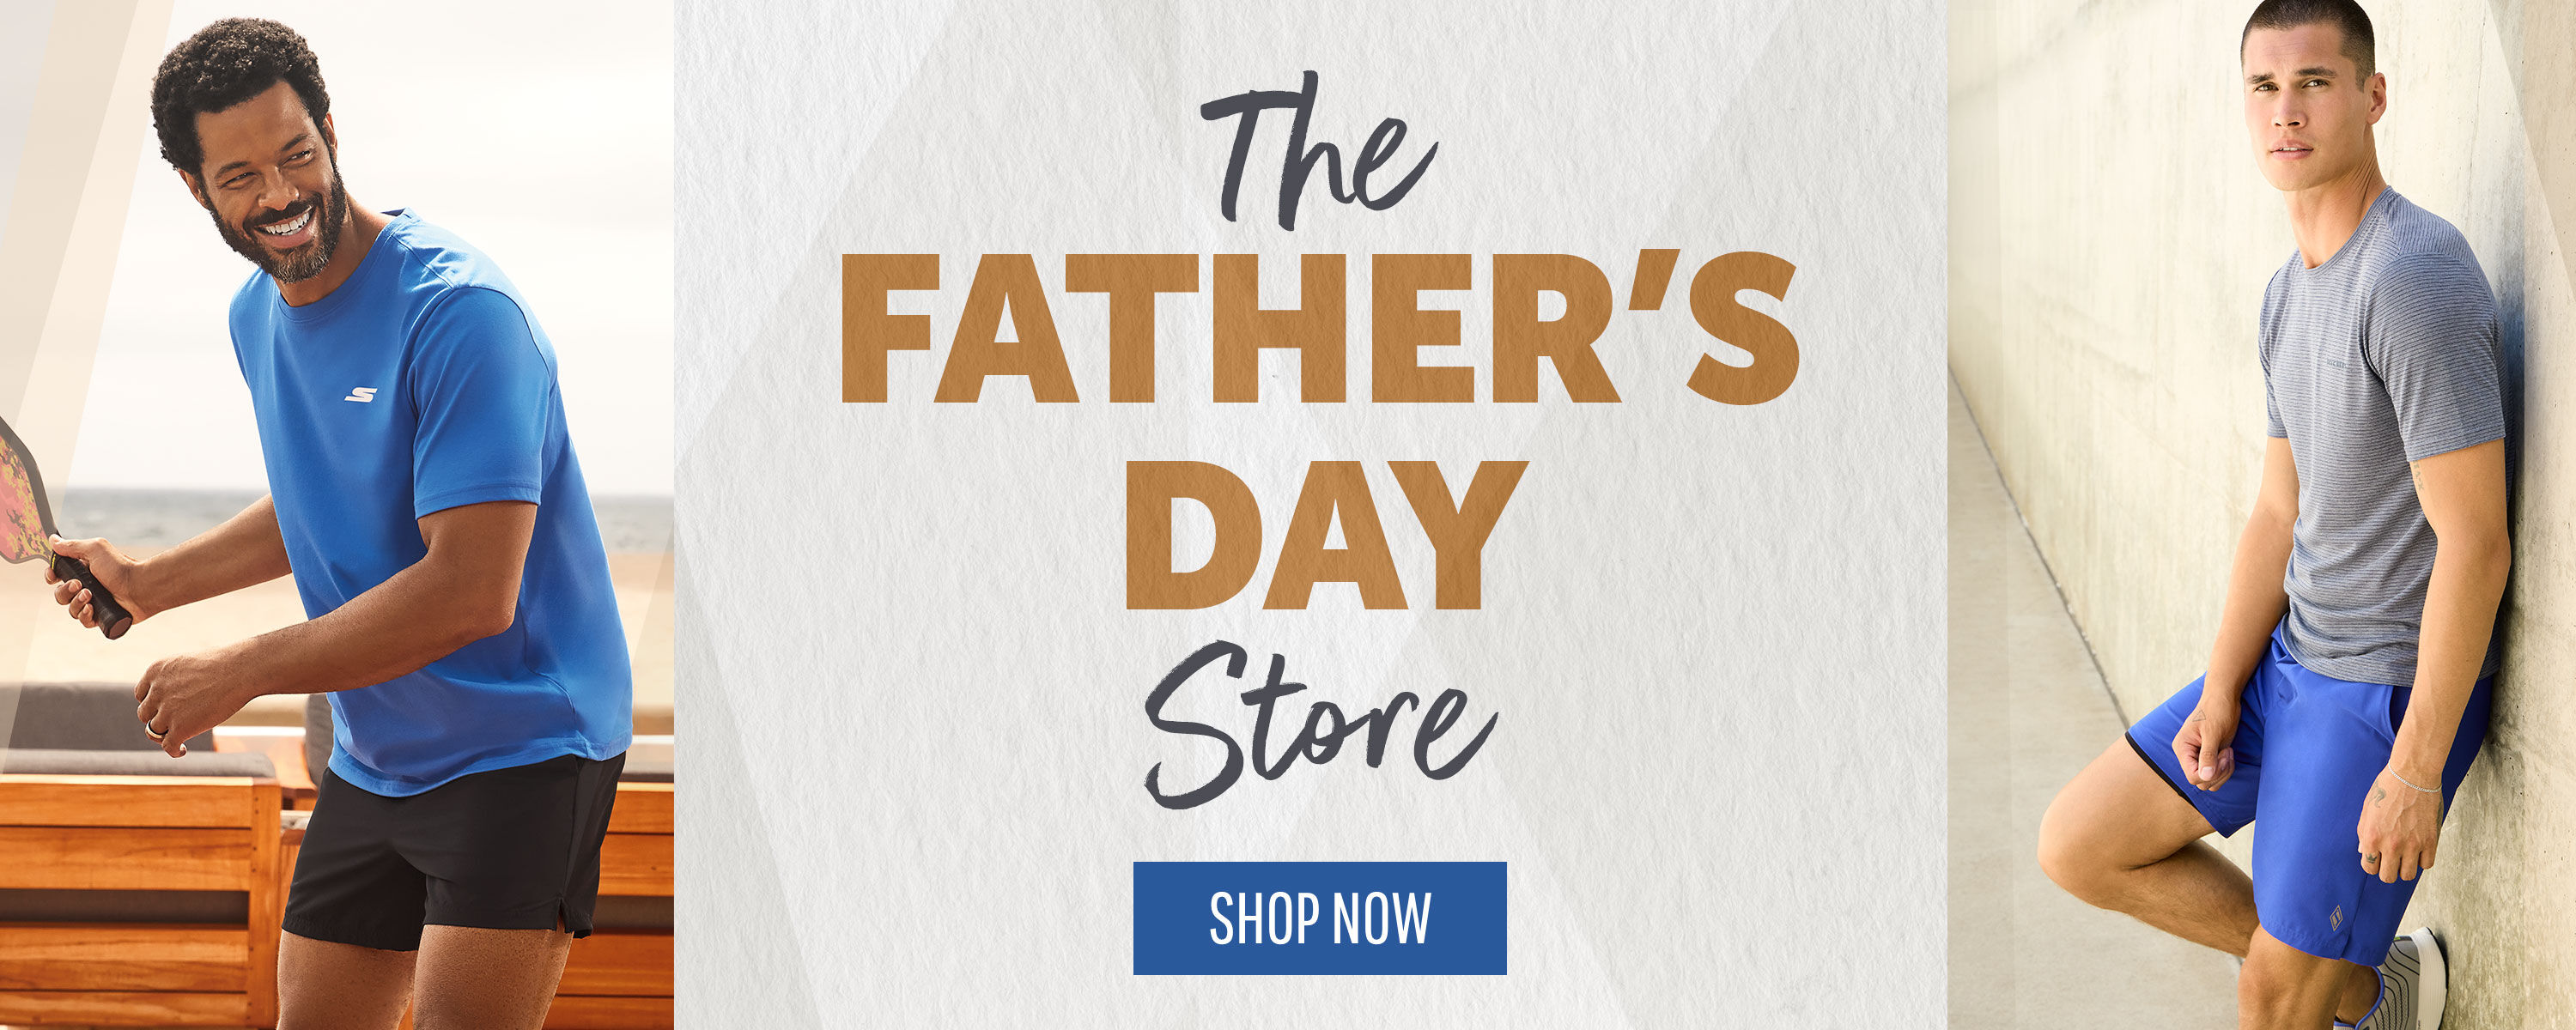 The Father's Day Store - SHOP NOW